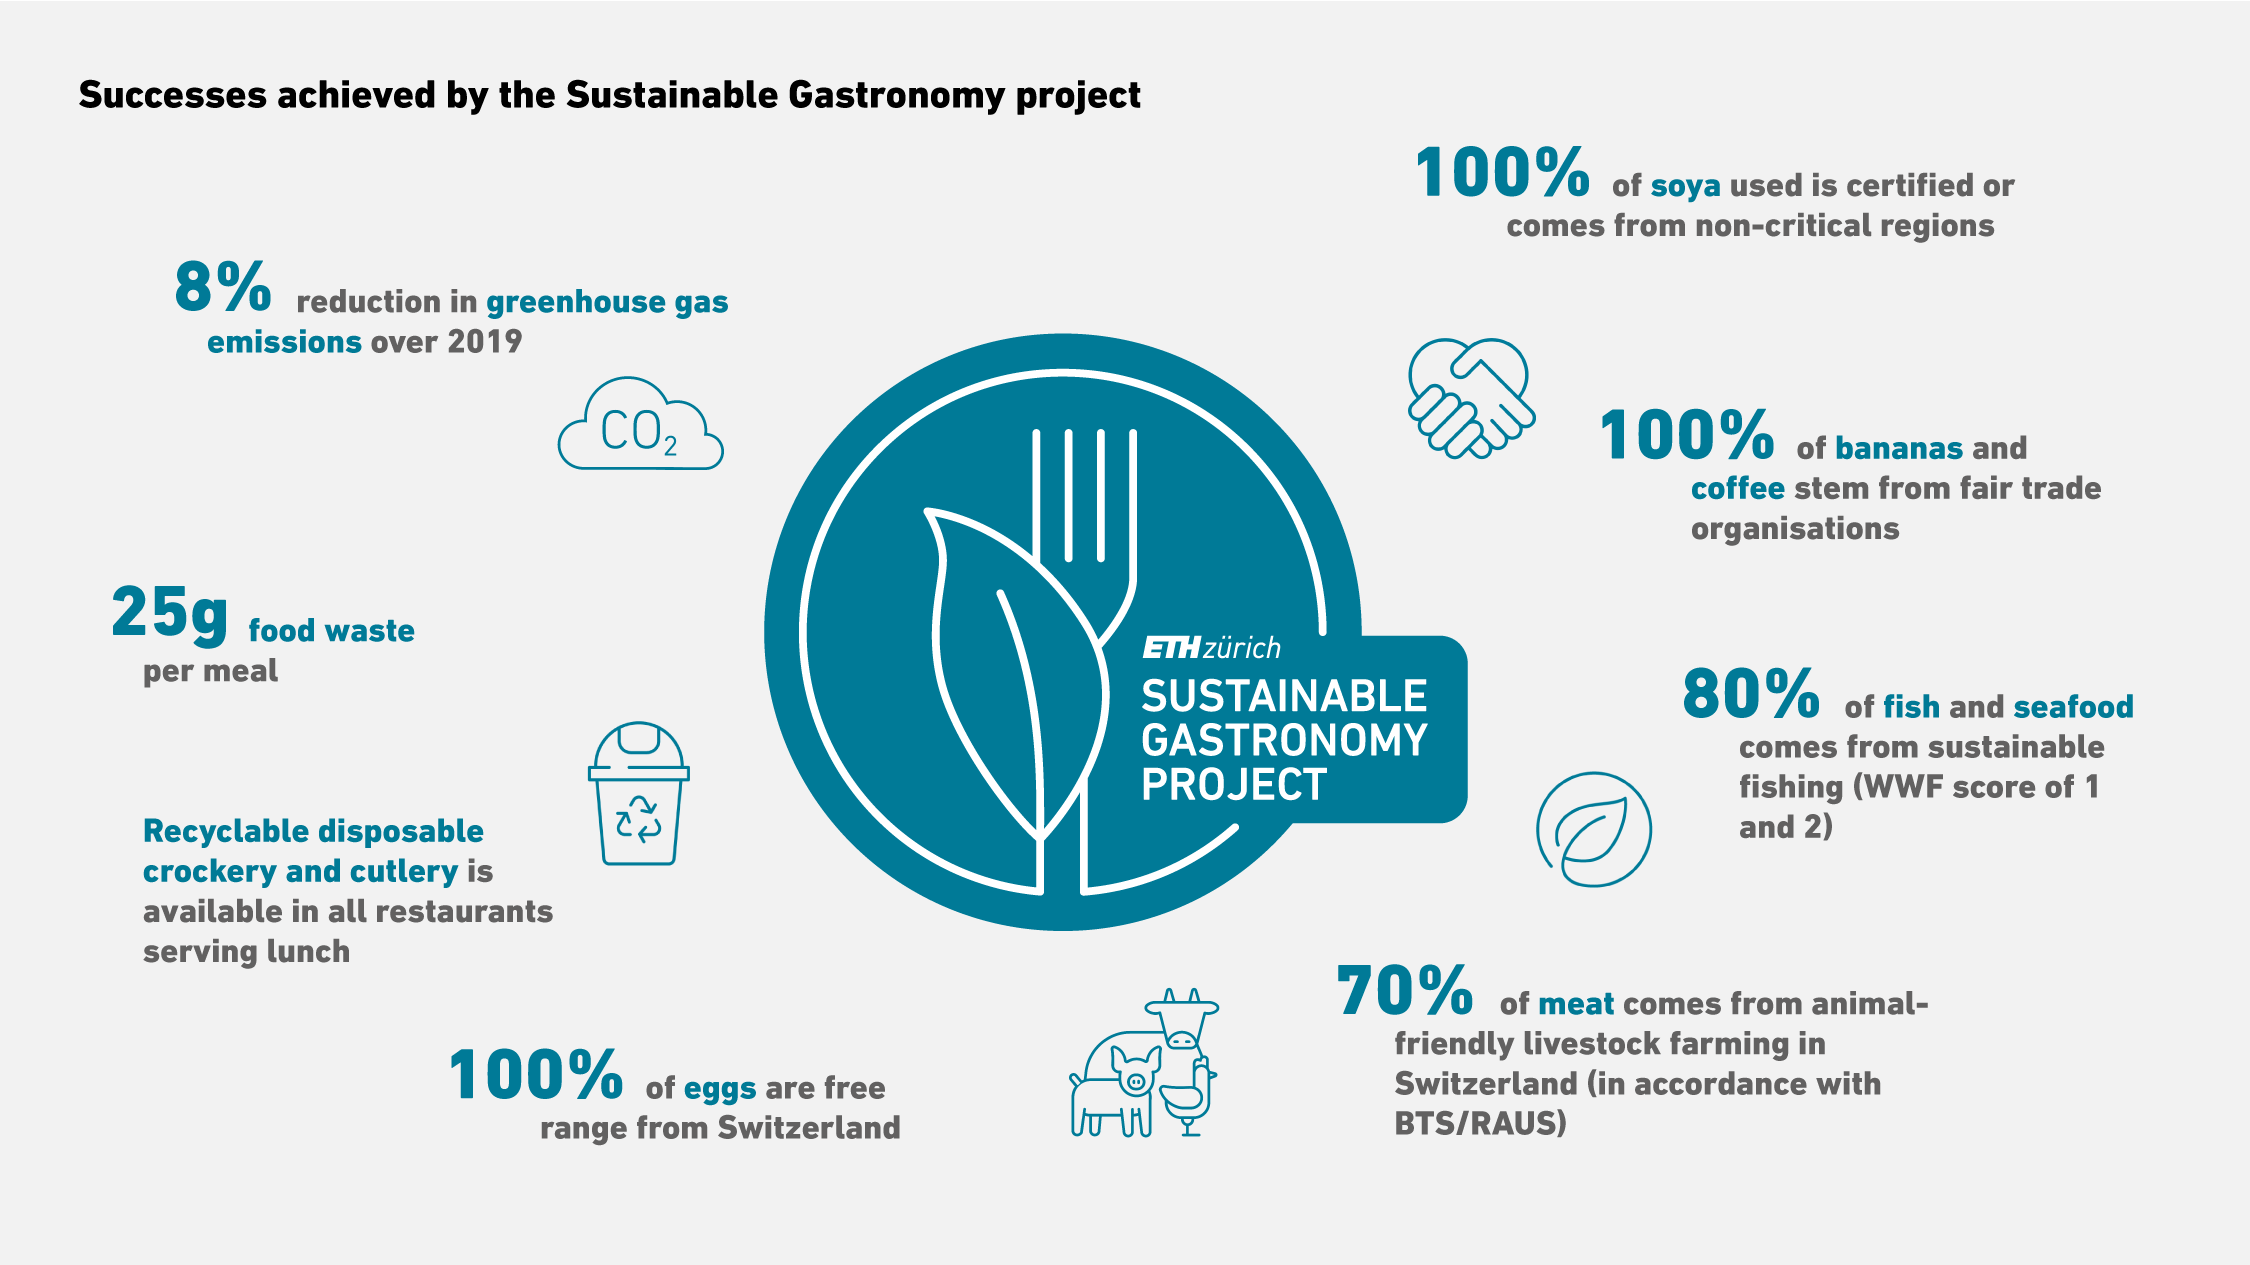 Enlarged view: Successes achieved by the Sustainable Gastronomy project – numbers